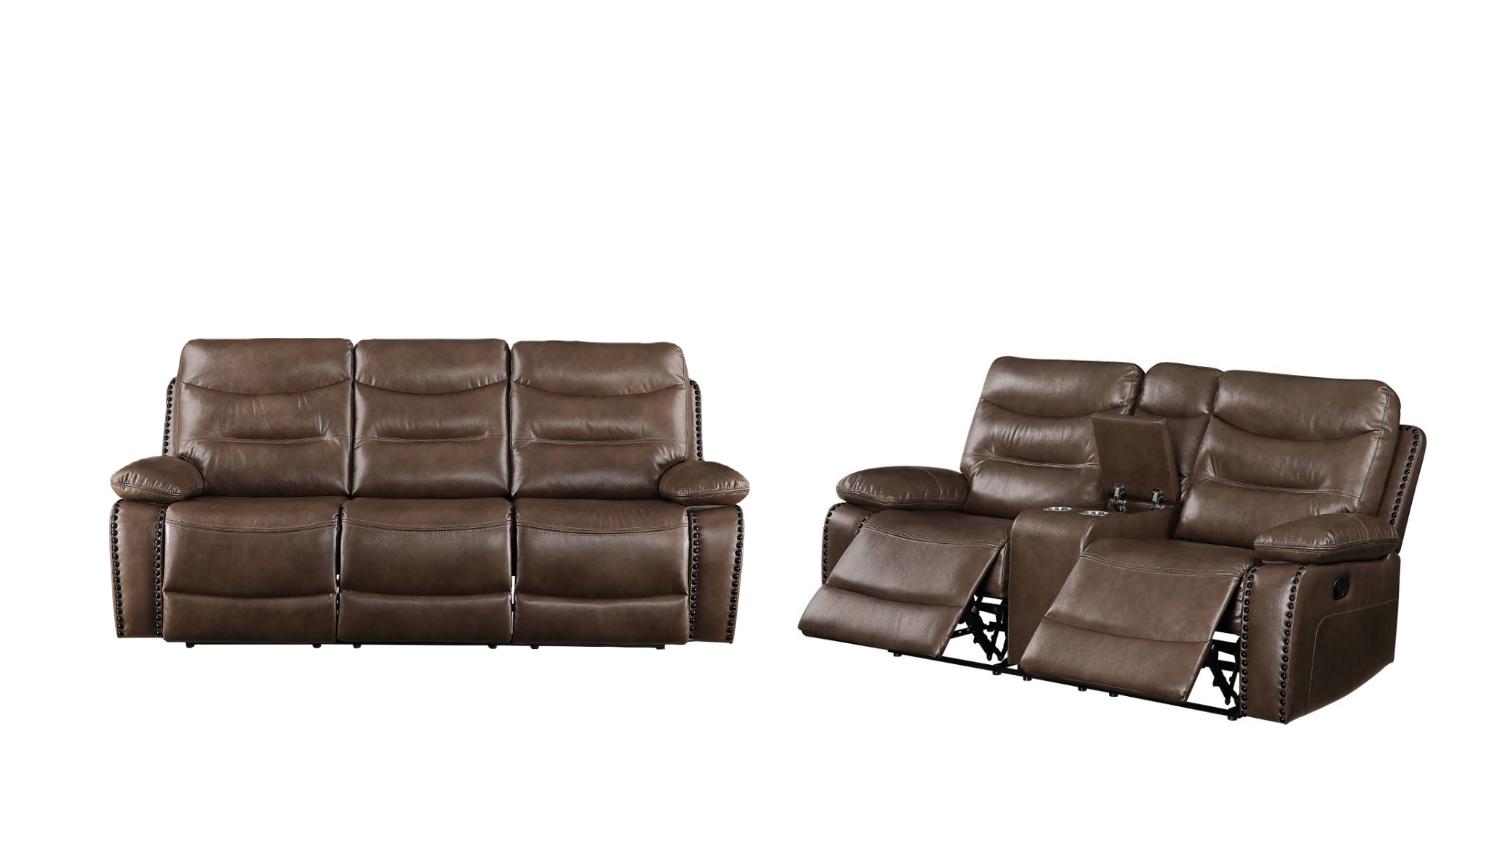 

    
Contemporary Brown Leather Motion Sofa + Loveseat w/ Console by Acme Aashi 55420-2pcs
